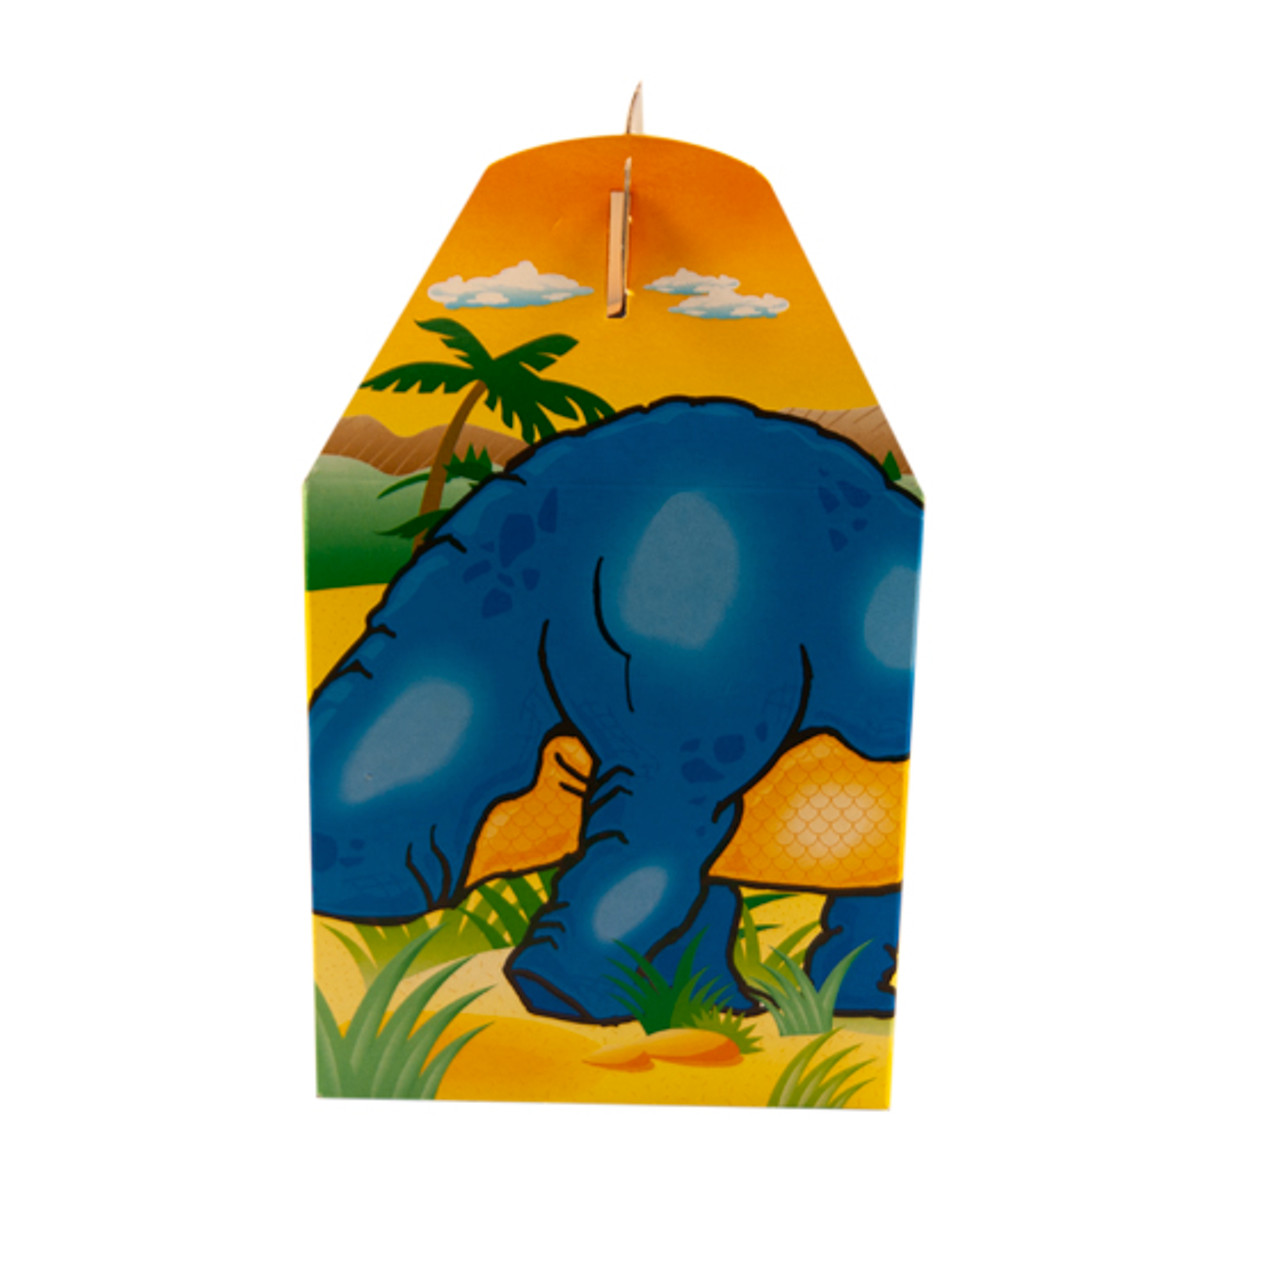 Pack x 10 Childrens Cardboard meal boxes printed Dinósaurs